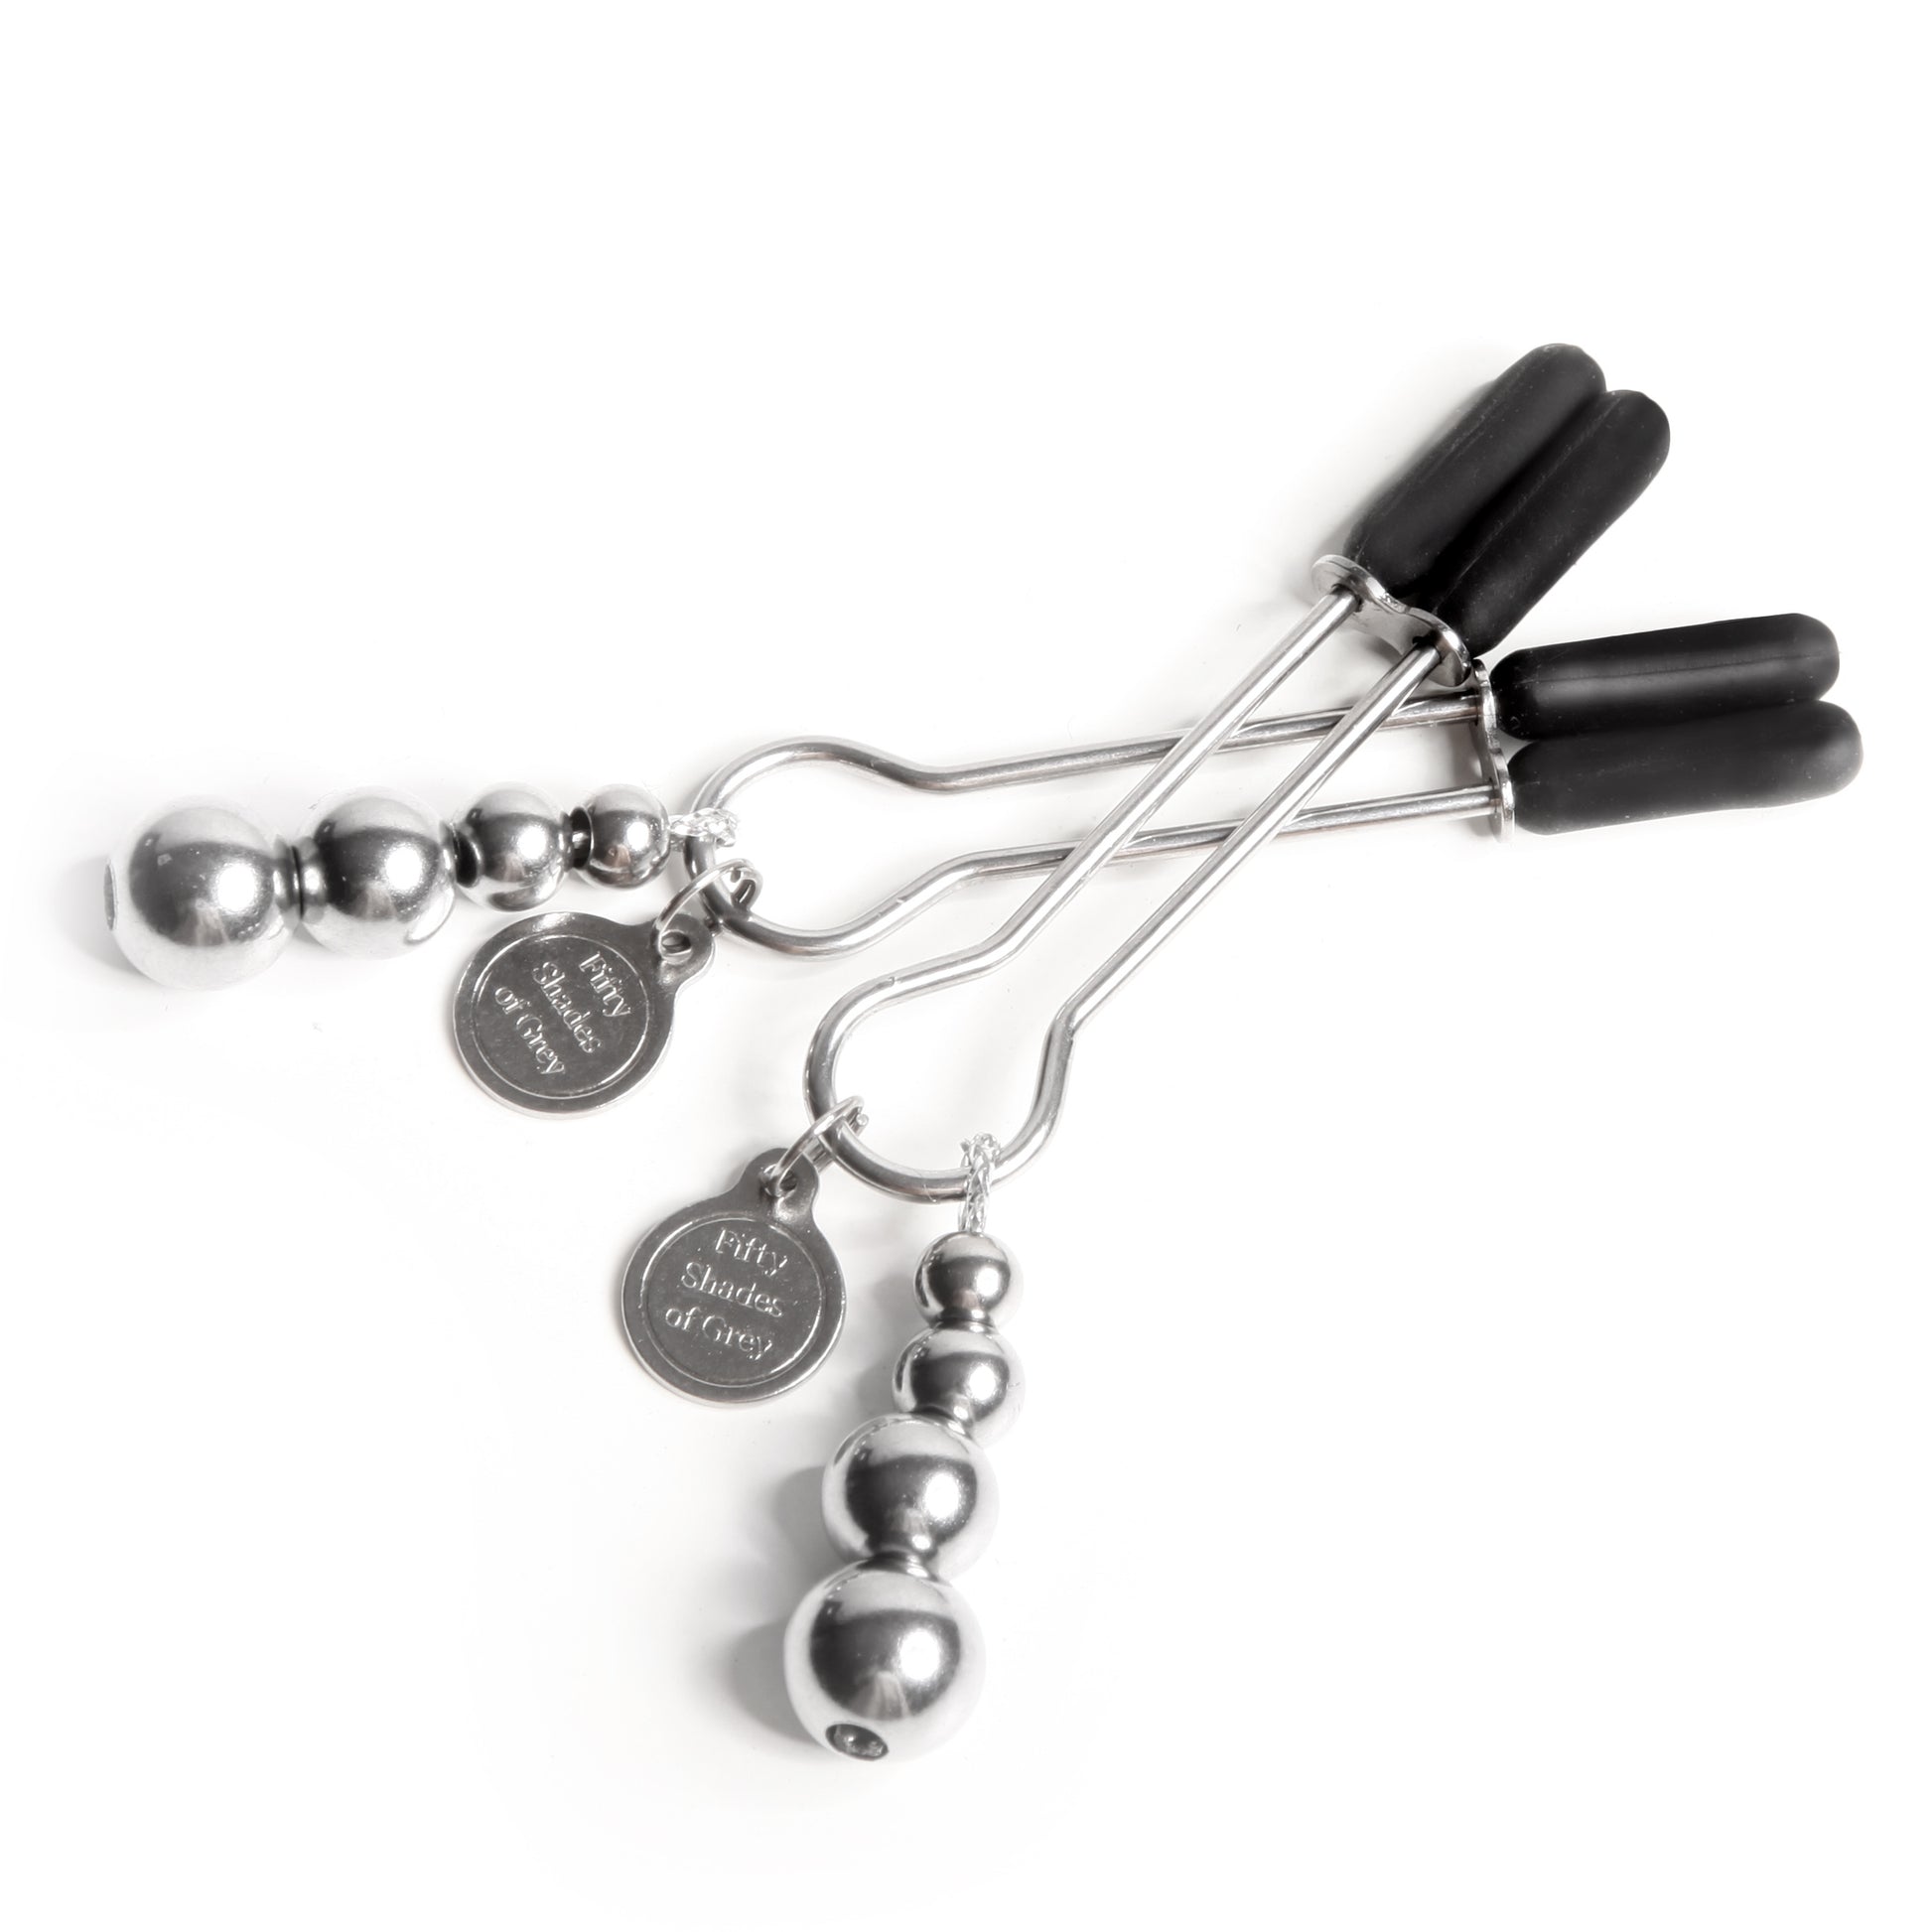 Fifty Shades of Grey the Pinch Adjustable Nipple  Clamps LHR-40186